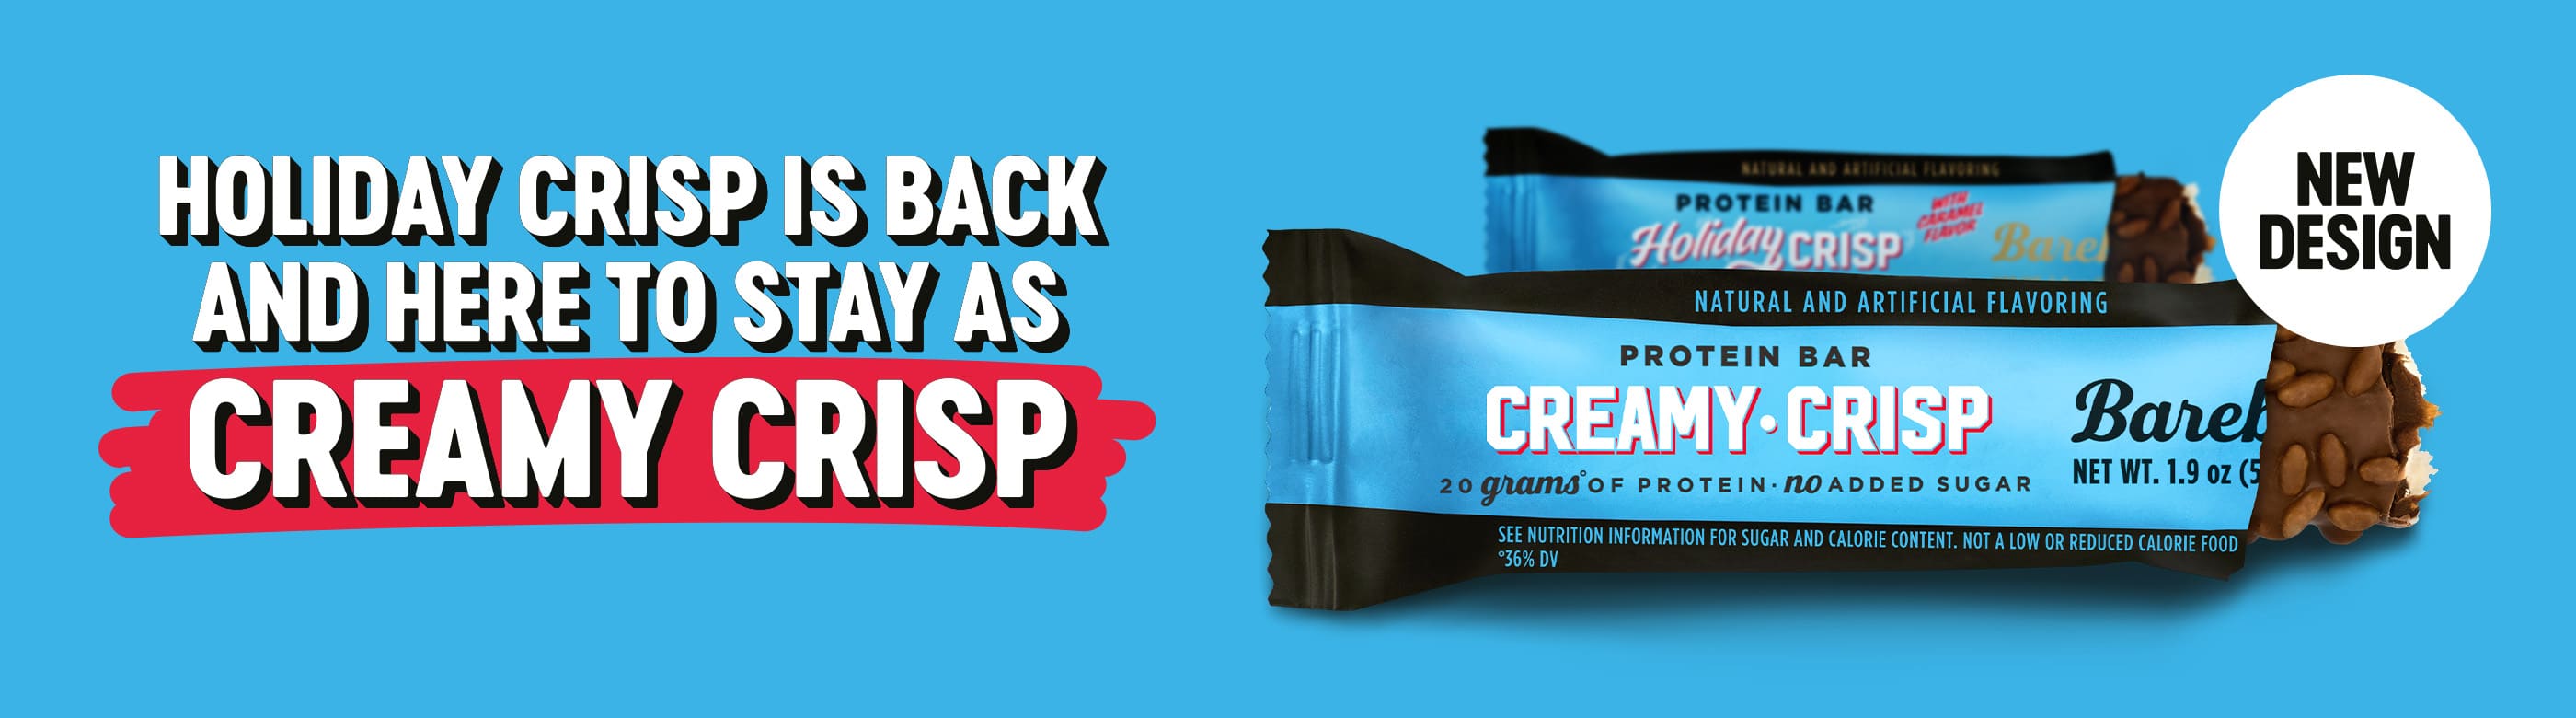 barebells holiday crisp back as creamy crisp protein bar with a new design wrapper